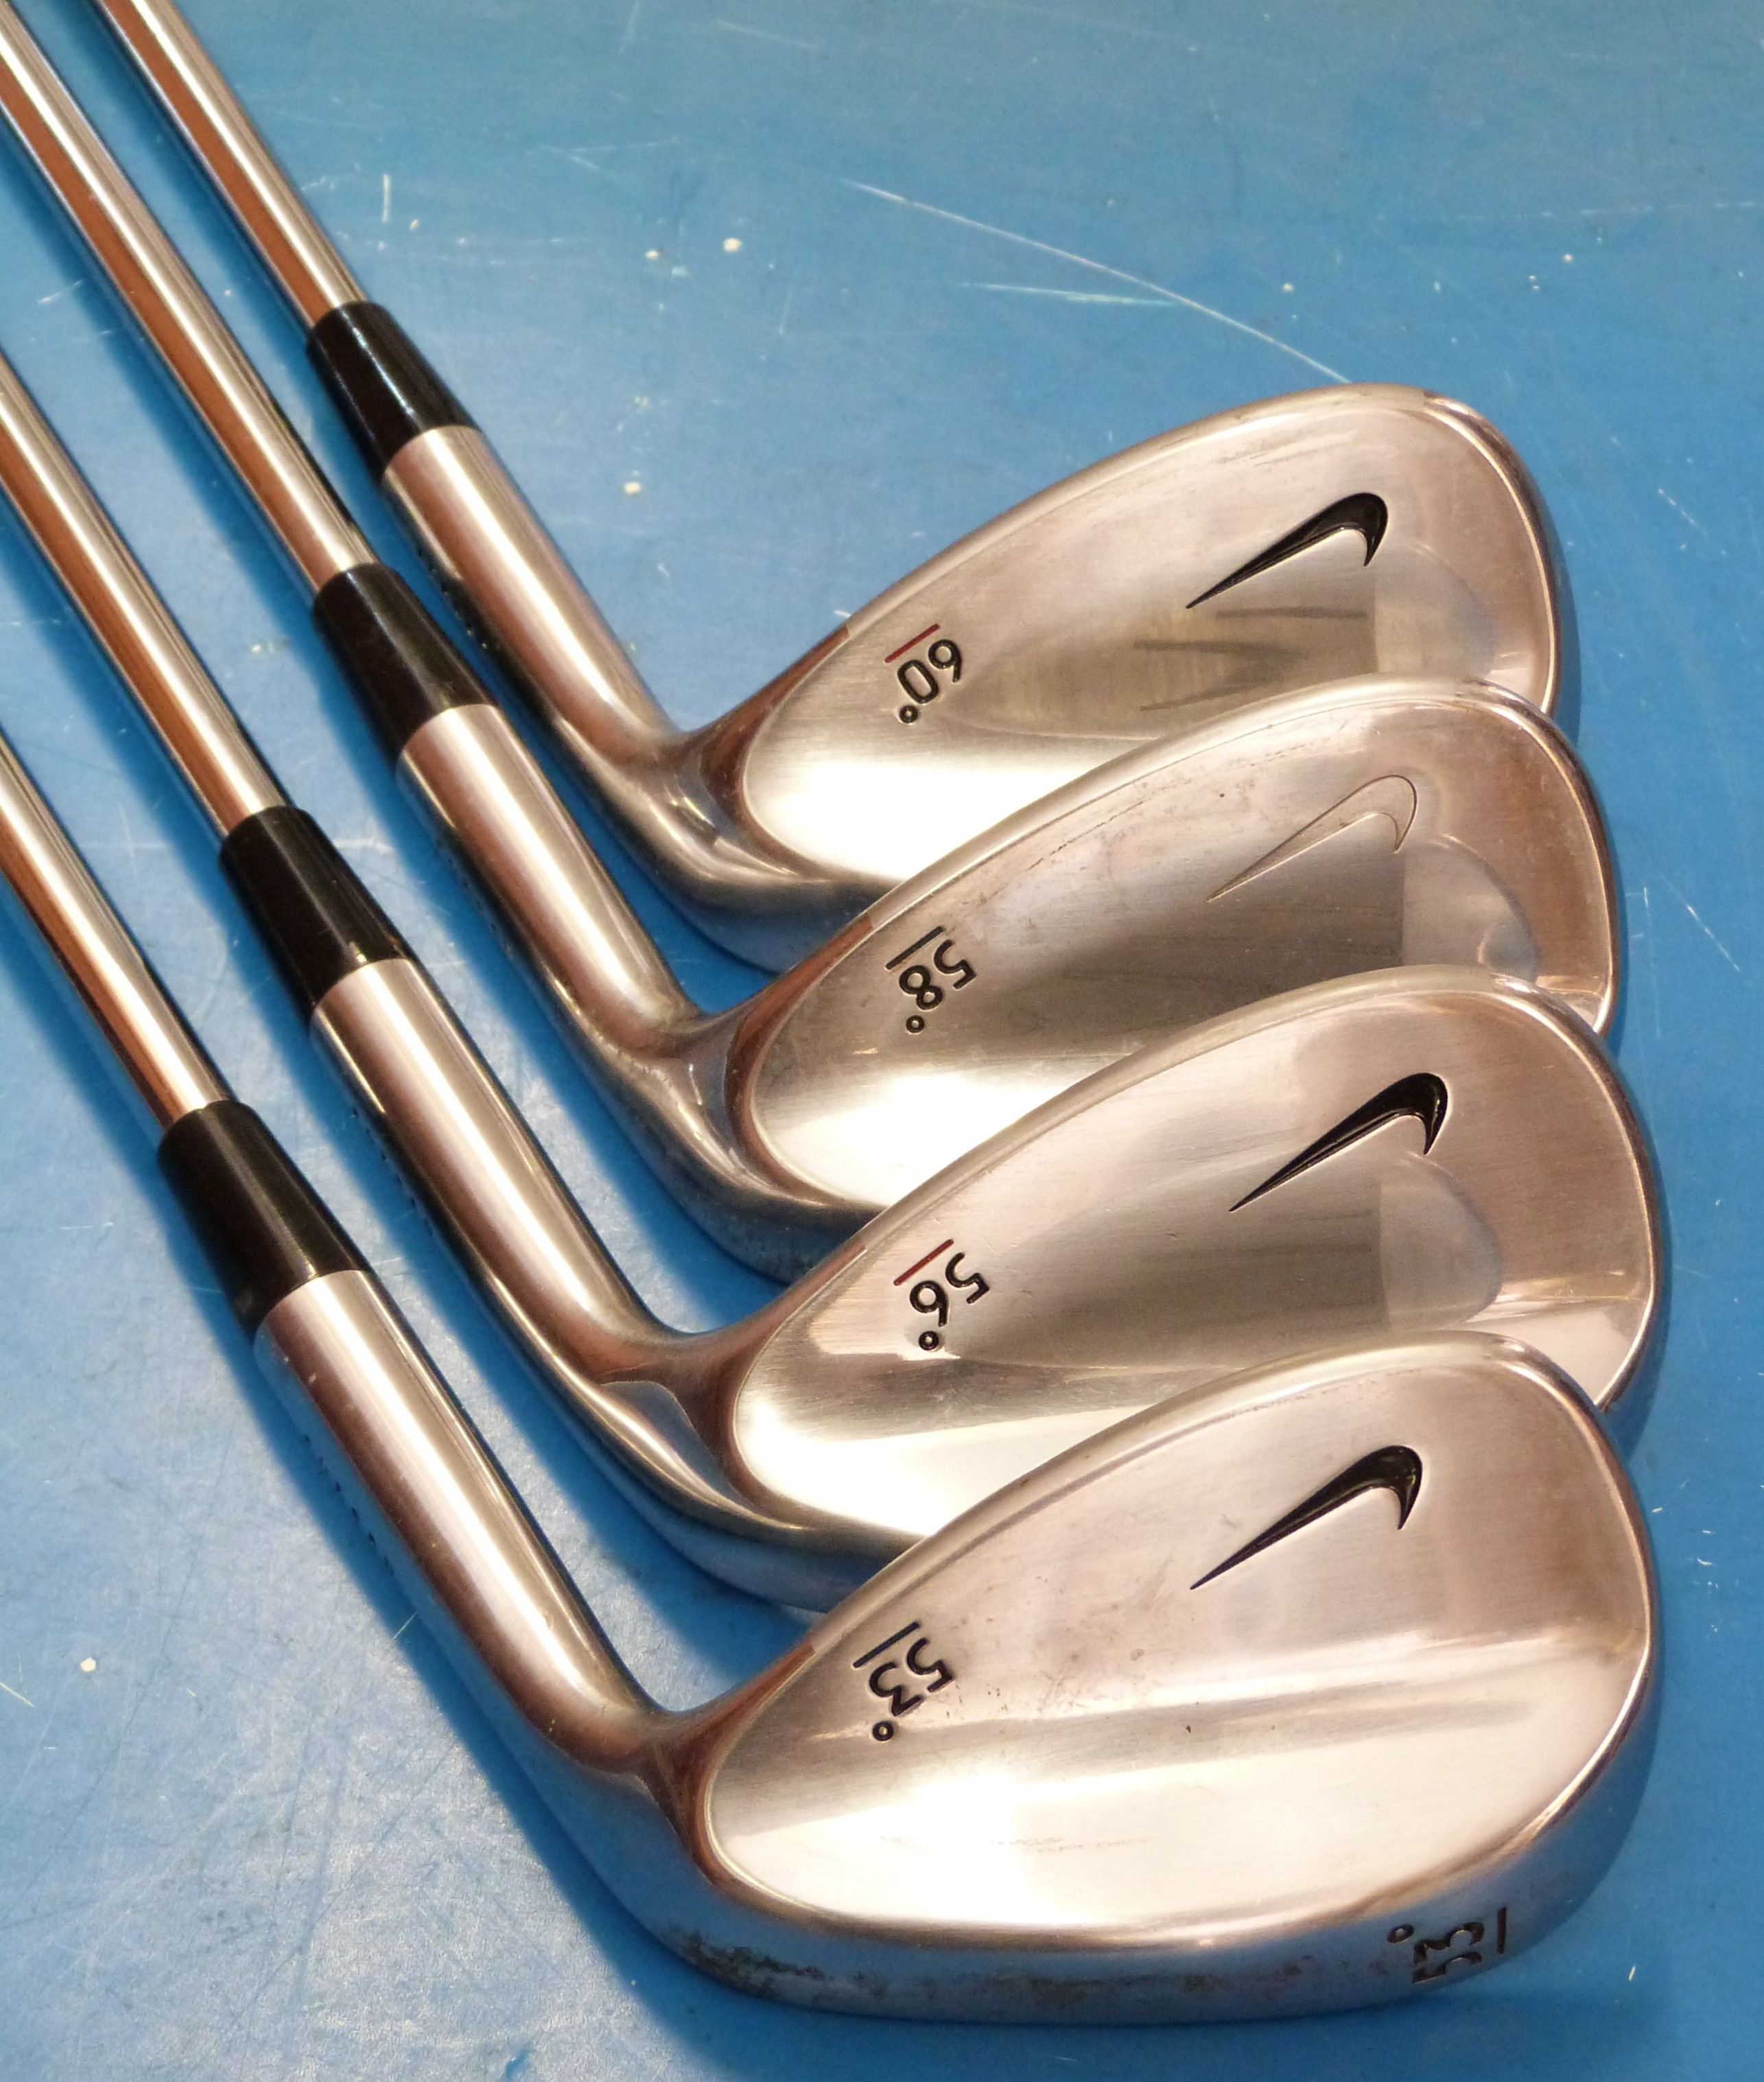 A set of four Nike golf wedges 53°, 56°, 58°,